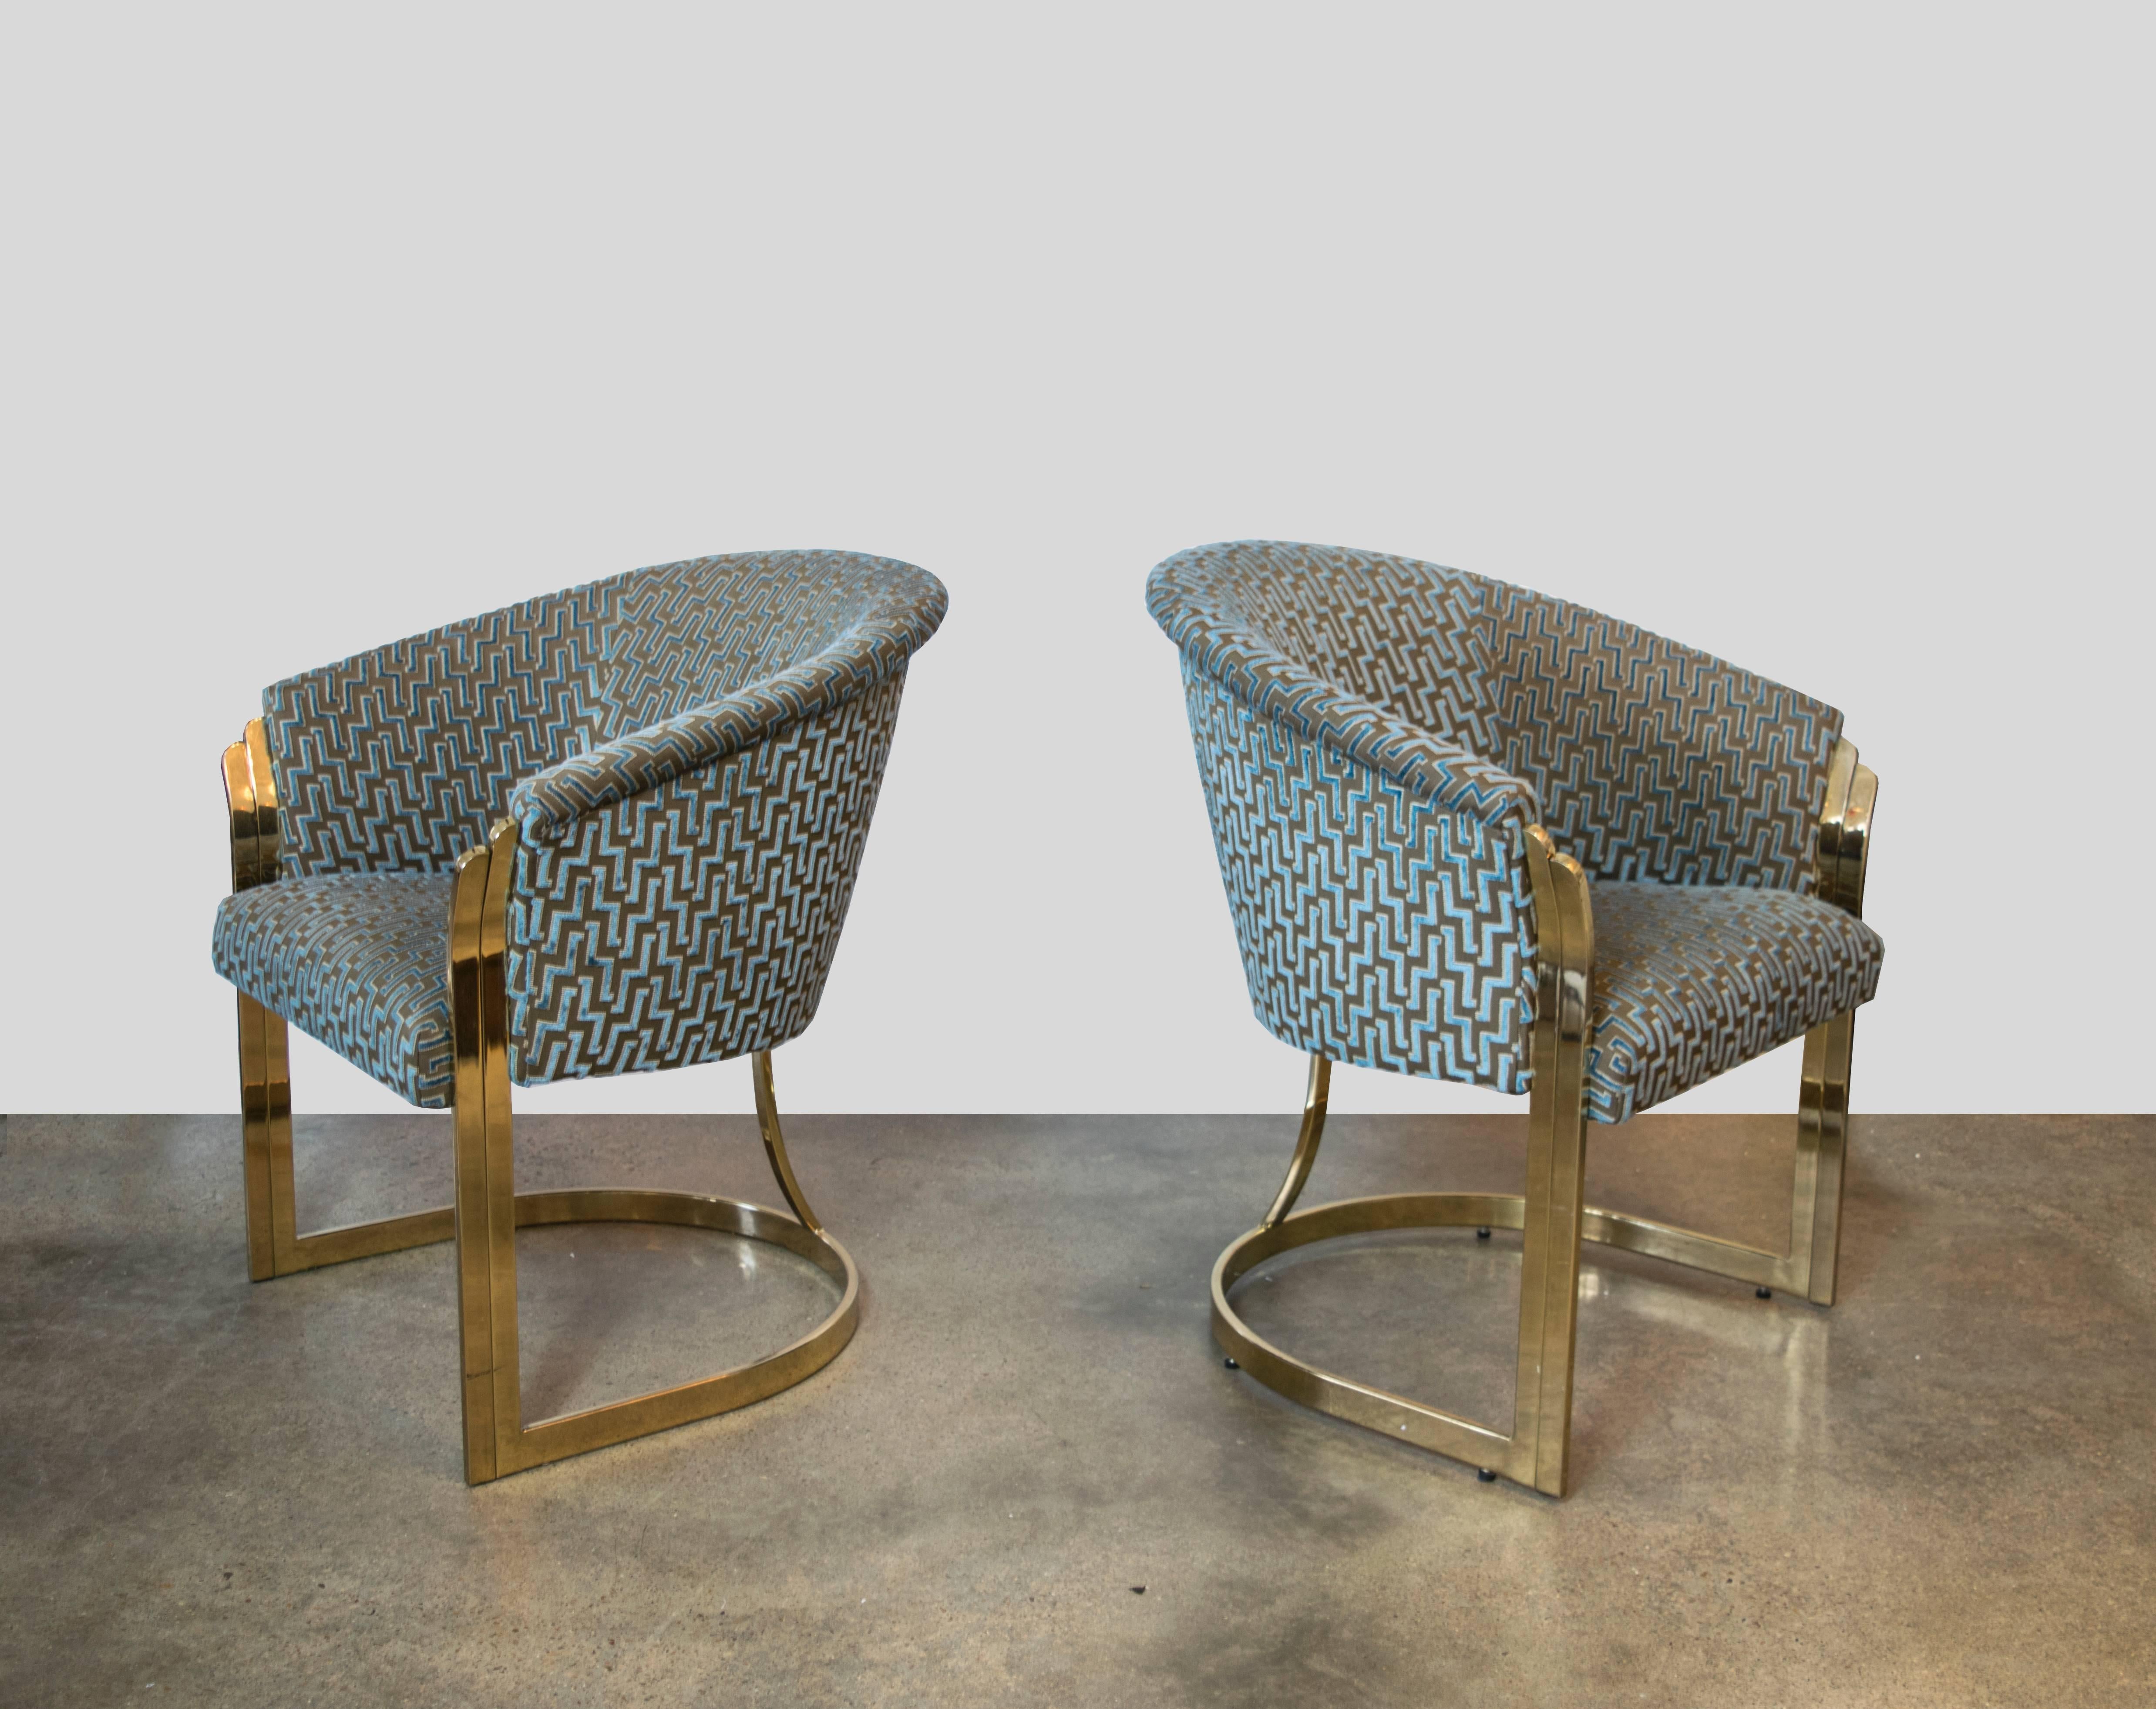 Beautifully sculptured brass chairs with fluted arm rests and a central bar bracing the backrest. Recently upholstered in Brentano teal and taupe cut velvet zig zags. These chairs are absolutely breathtaking in person.